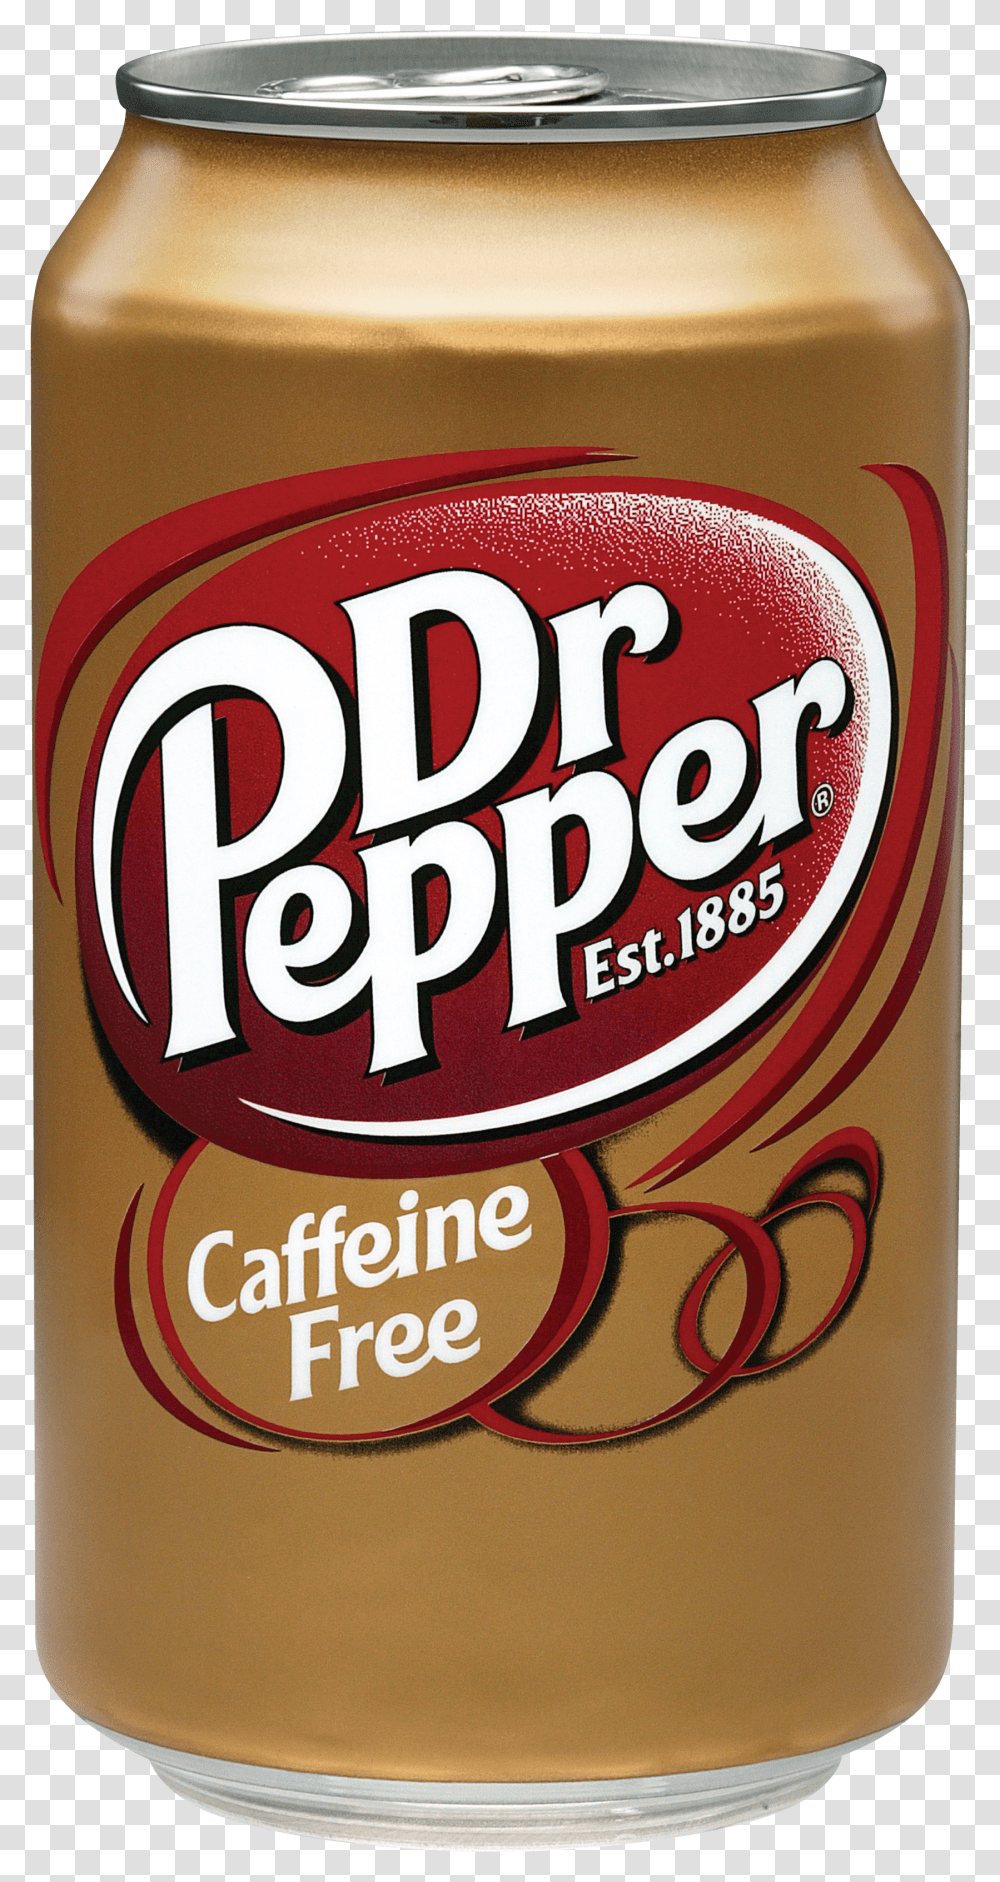 Dr Pepper Caffeine Free Cans Transparent Png